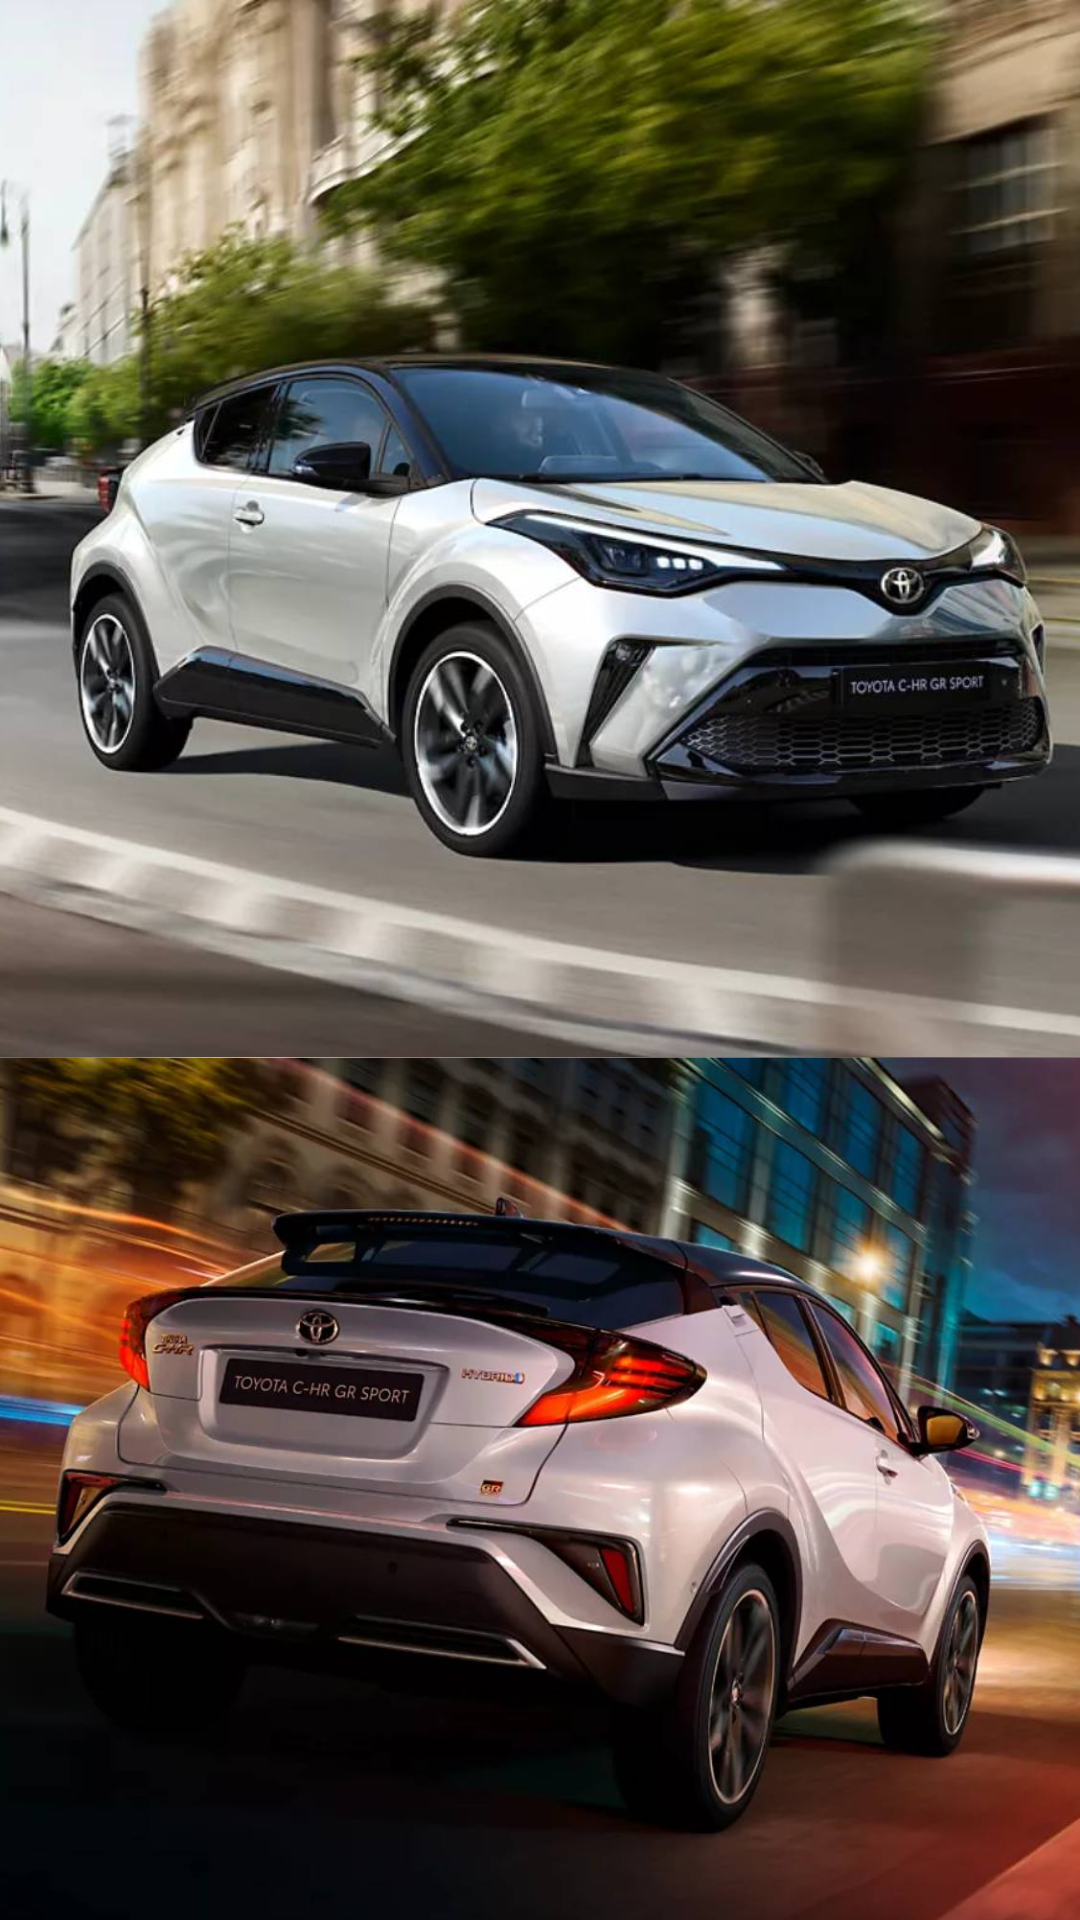 5 Reasons Why 2nd Gen Toyota C-HR Should Launch In India